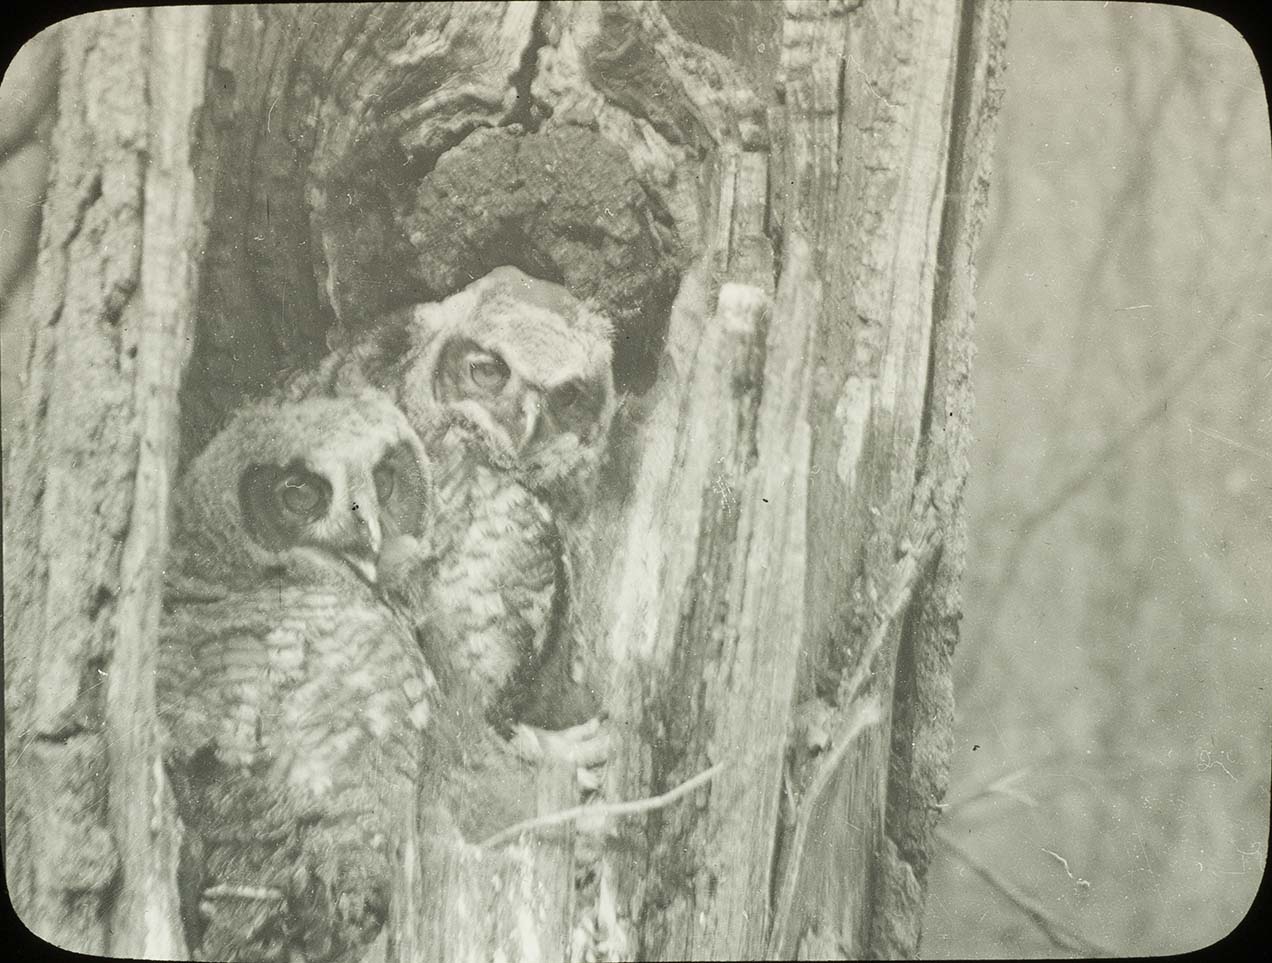 Lantern slide of two young Owls in a nest